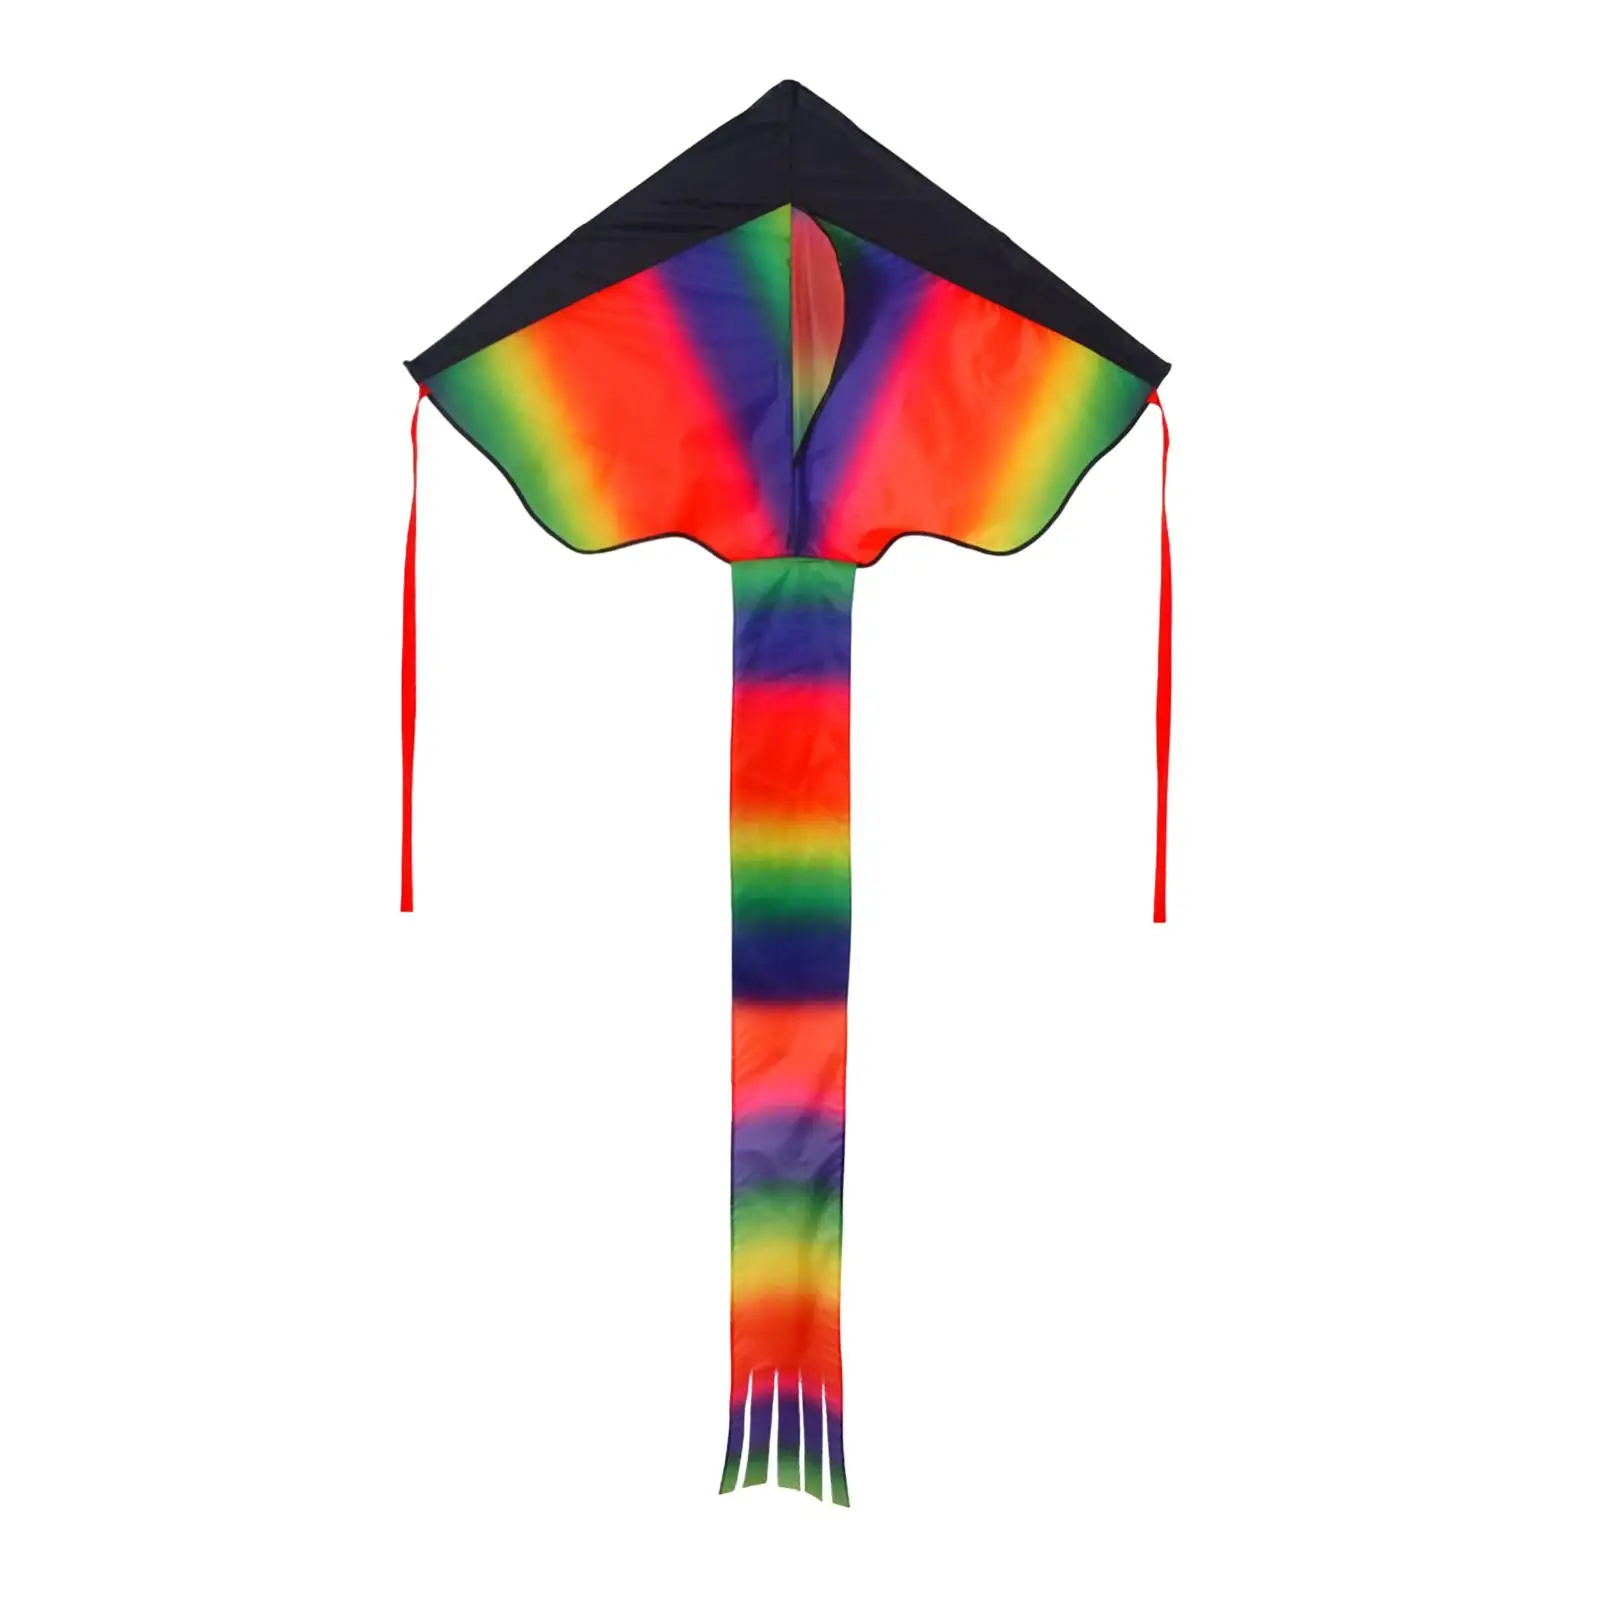 Giant Delta Kites Fly Kite Rainbow Huge 1 Width Triangle Kite with Tail Long Tail for Outdoor Toy Teenagers Beginner Kids Adults